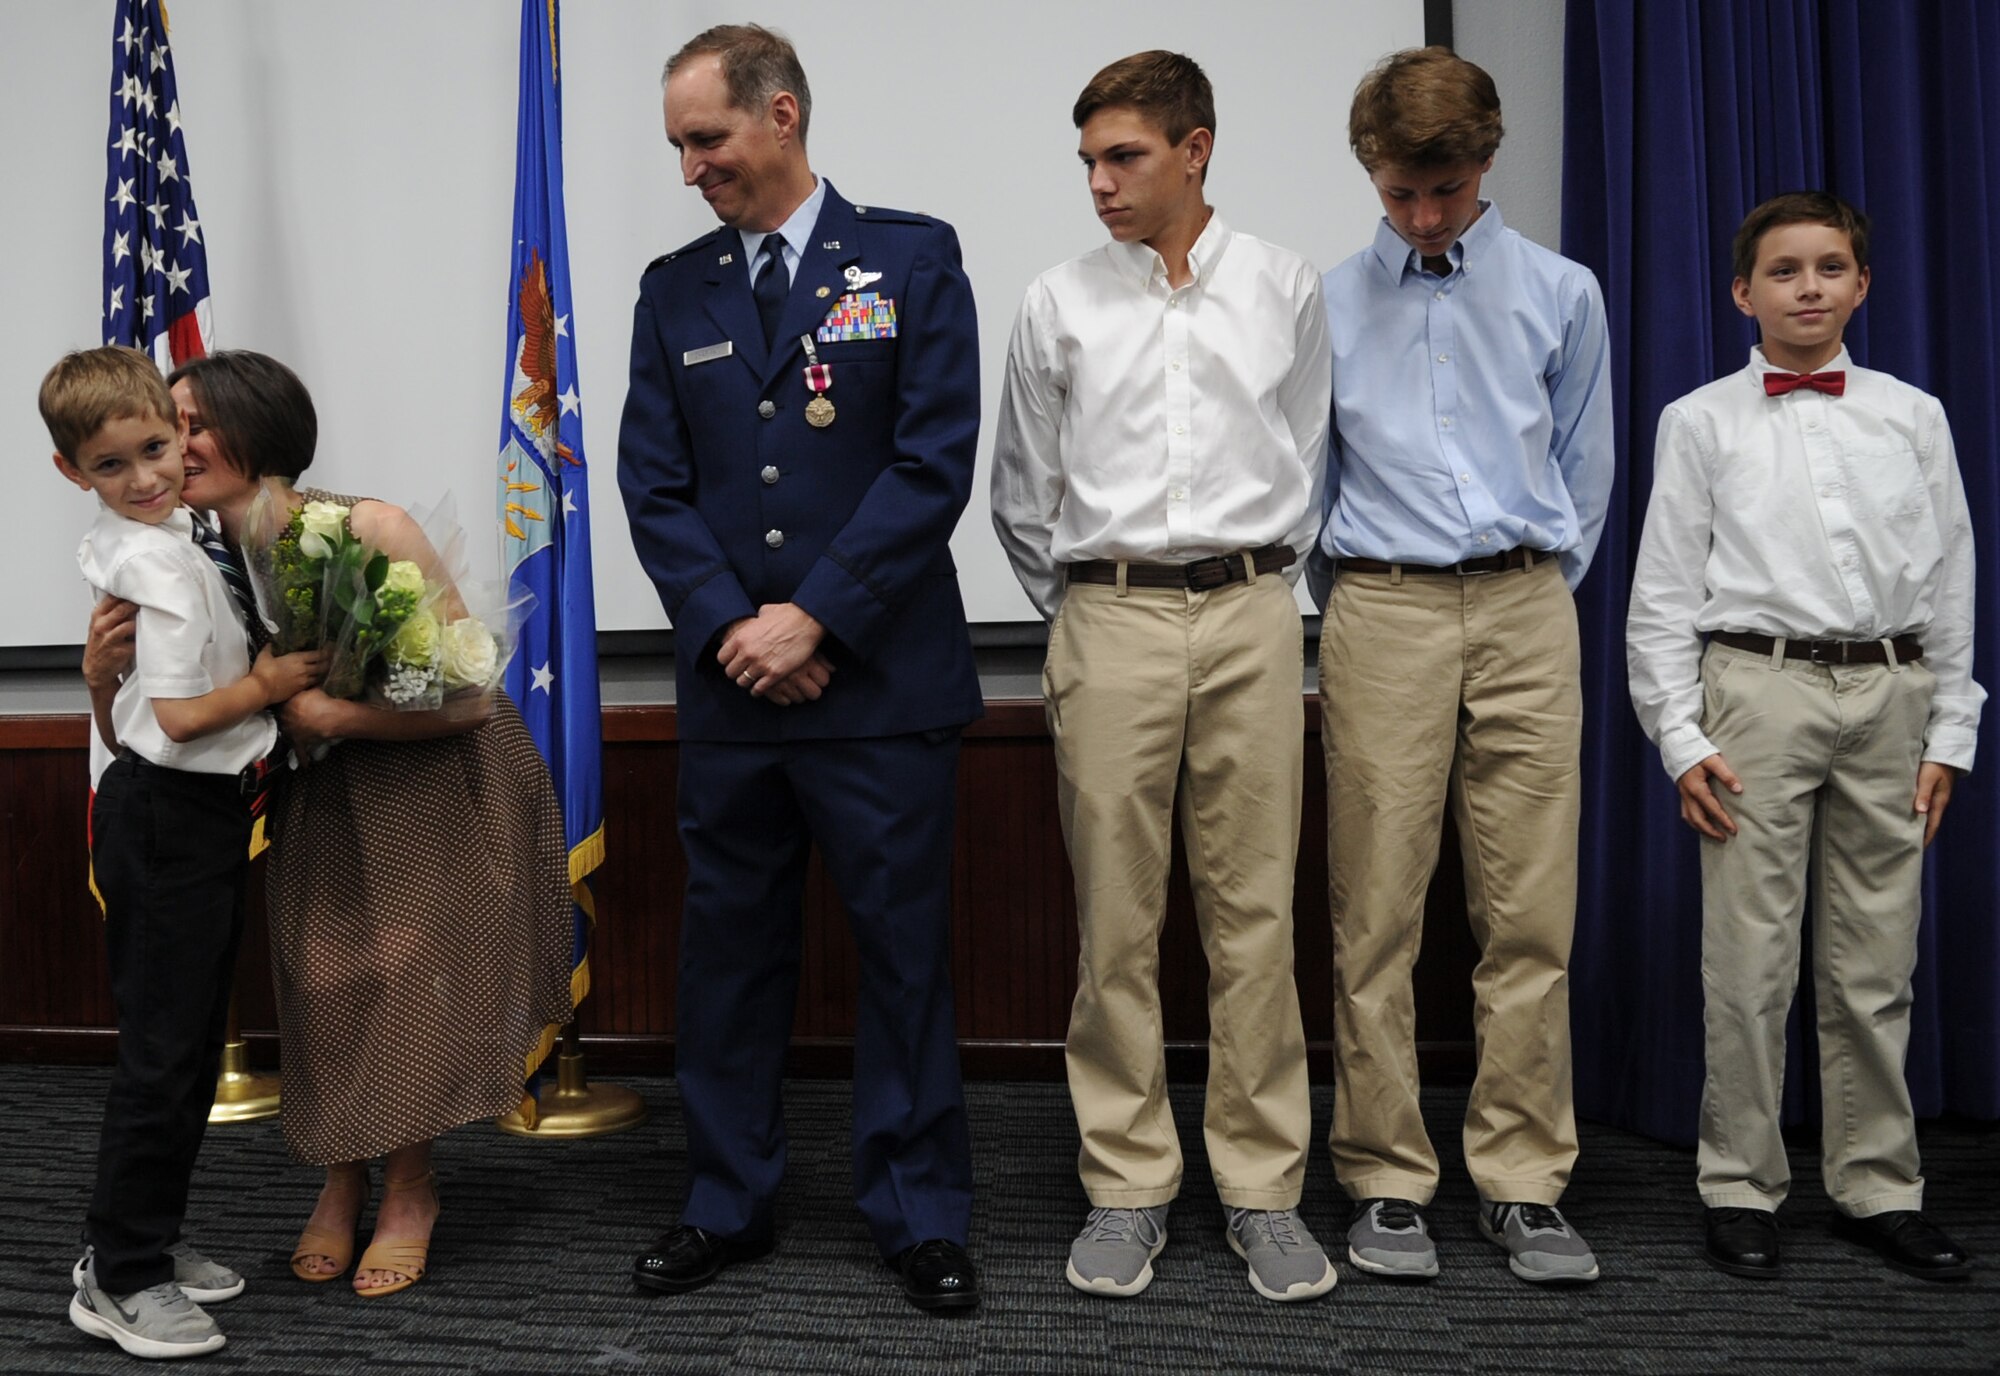 Christa Chapman accepts white roses from her four sons during retirement ceremonies held for husband Lt. Col.  Timothy Chapman during the former 340th FTG Reserve Undergraduate Flying Training Program manager's Aug. 29 retirement ceremony at Joint Base San Antonio-Randolph, Texas. Christa was honored by Chapman, their sons and the assembled guests for her role in Chapman's successful military career. (U.S. Air Force photo by Debbie Gildea)